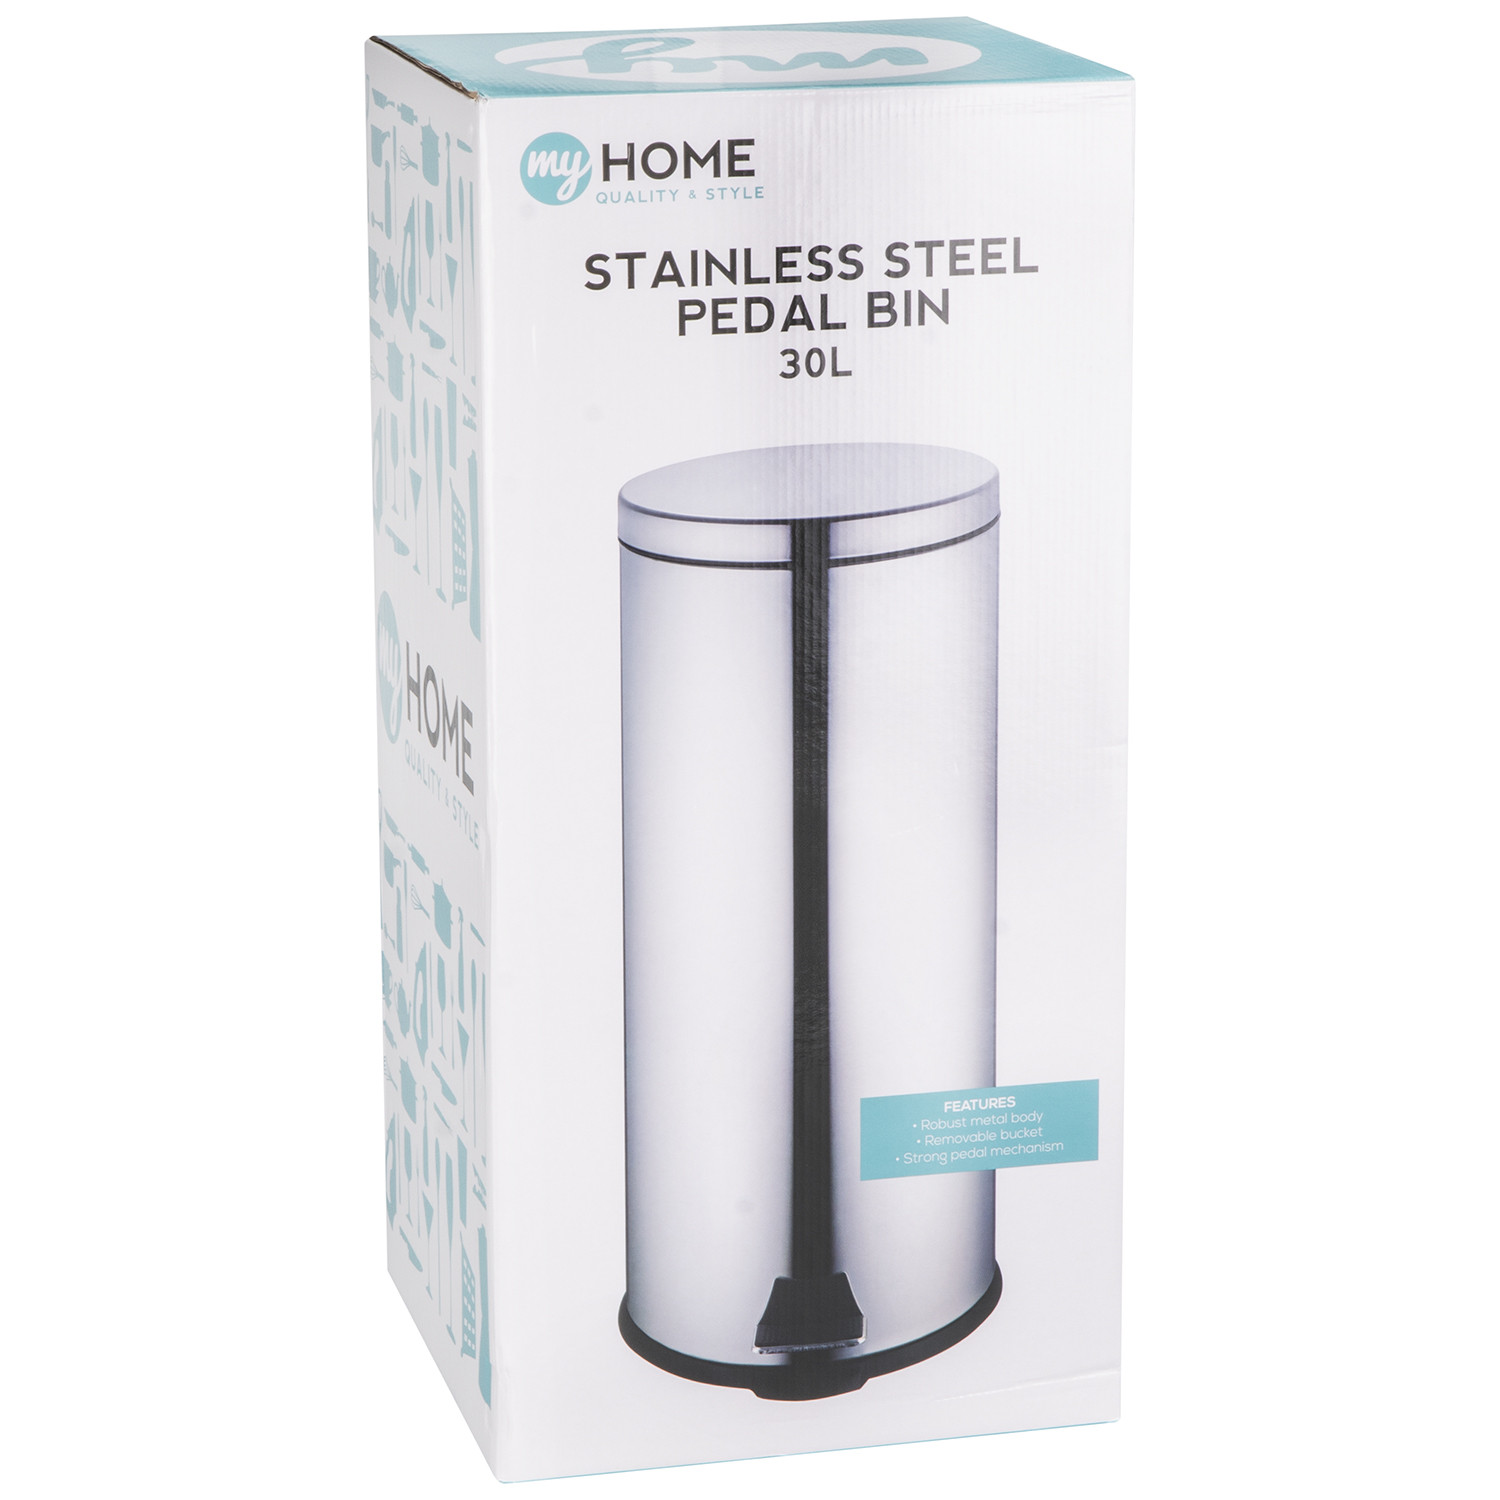 My Home Stainless Steel Pedal Bin 30L Image 3